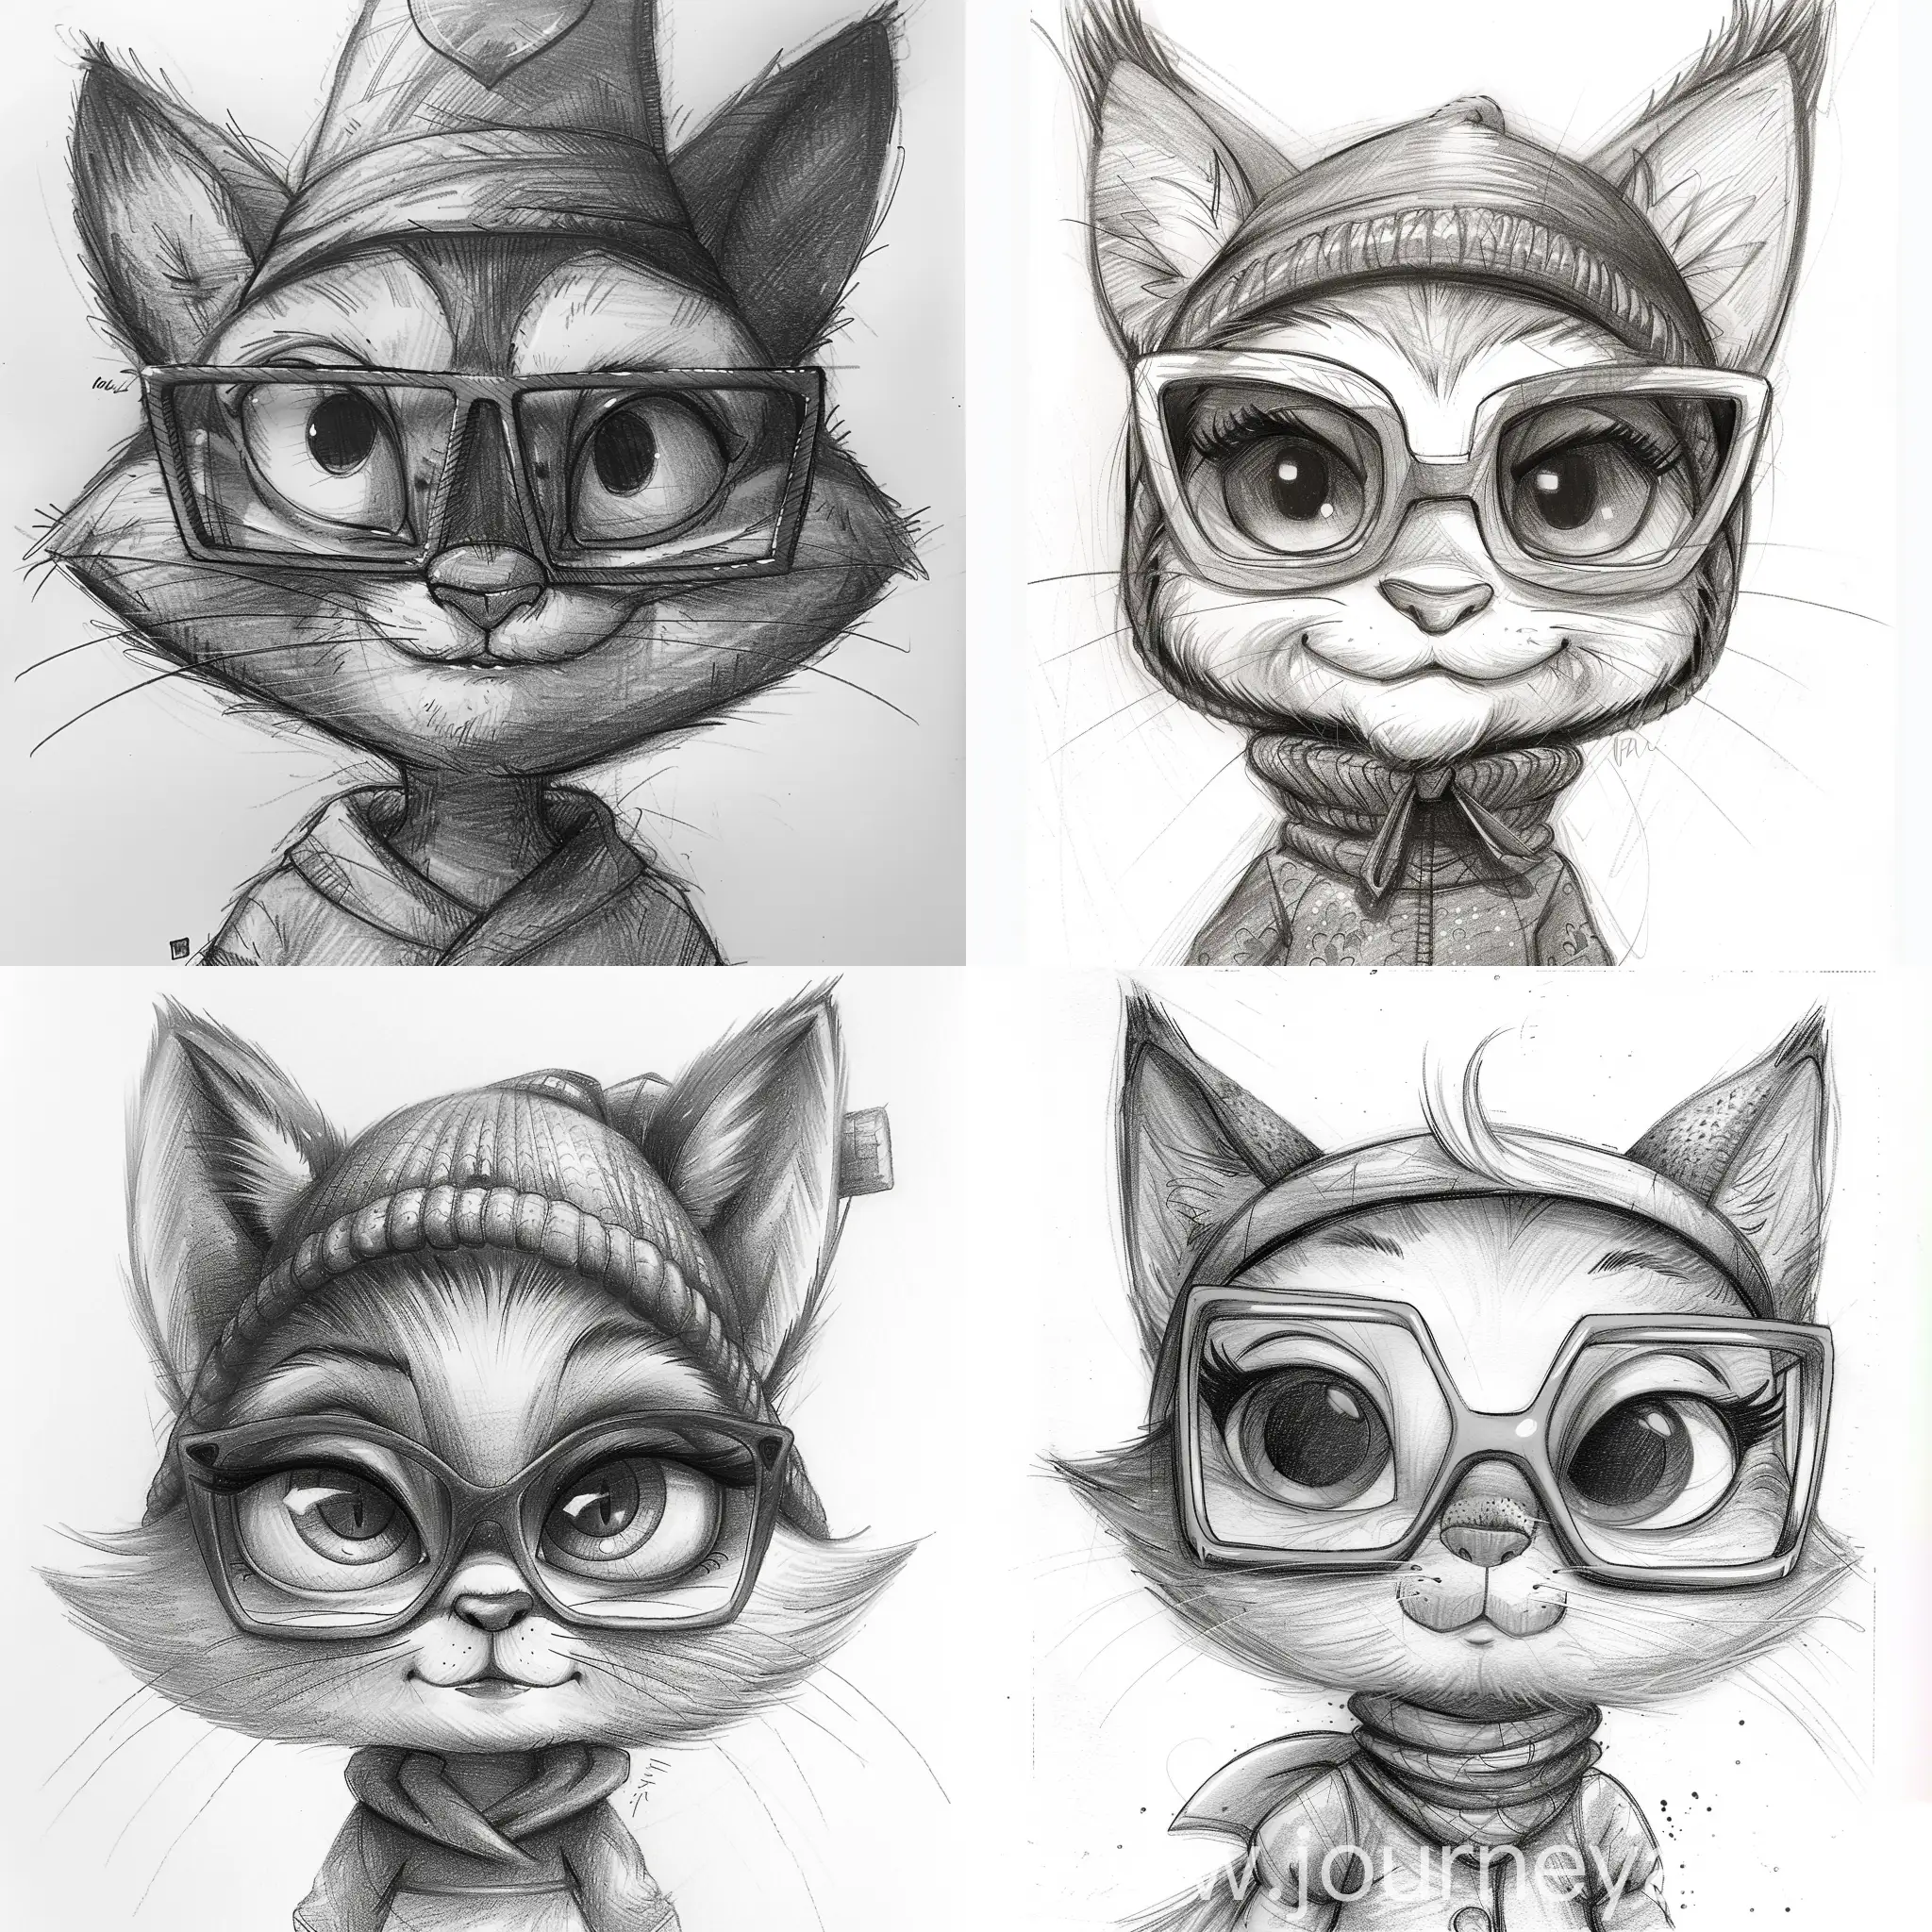 Whimsical-Pencil-Drawing-of-Puss-in-Boots-Wearing-Square-Glasses